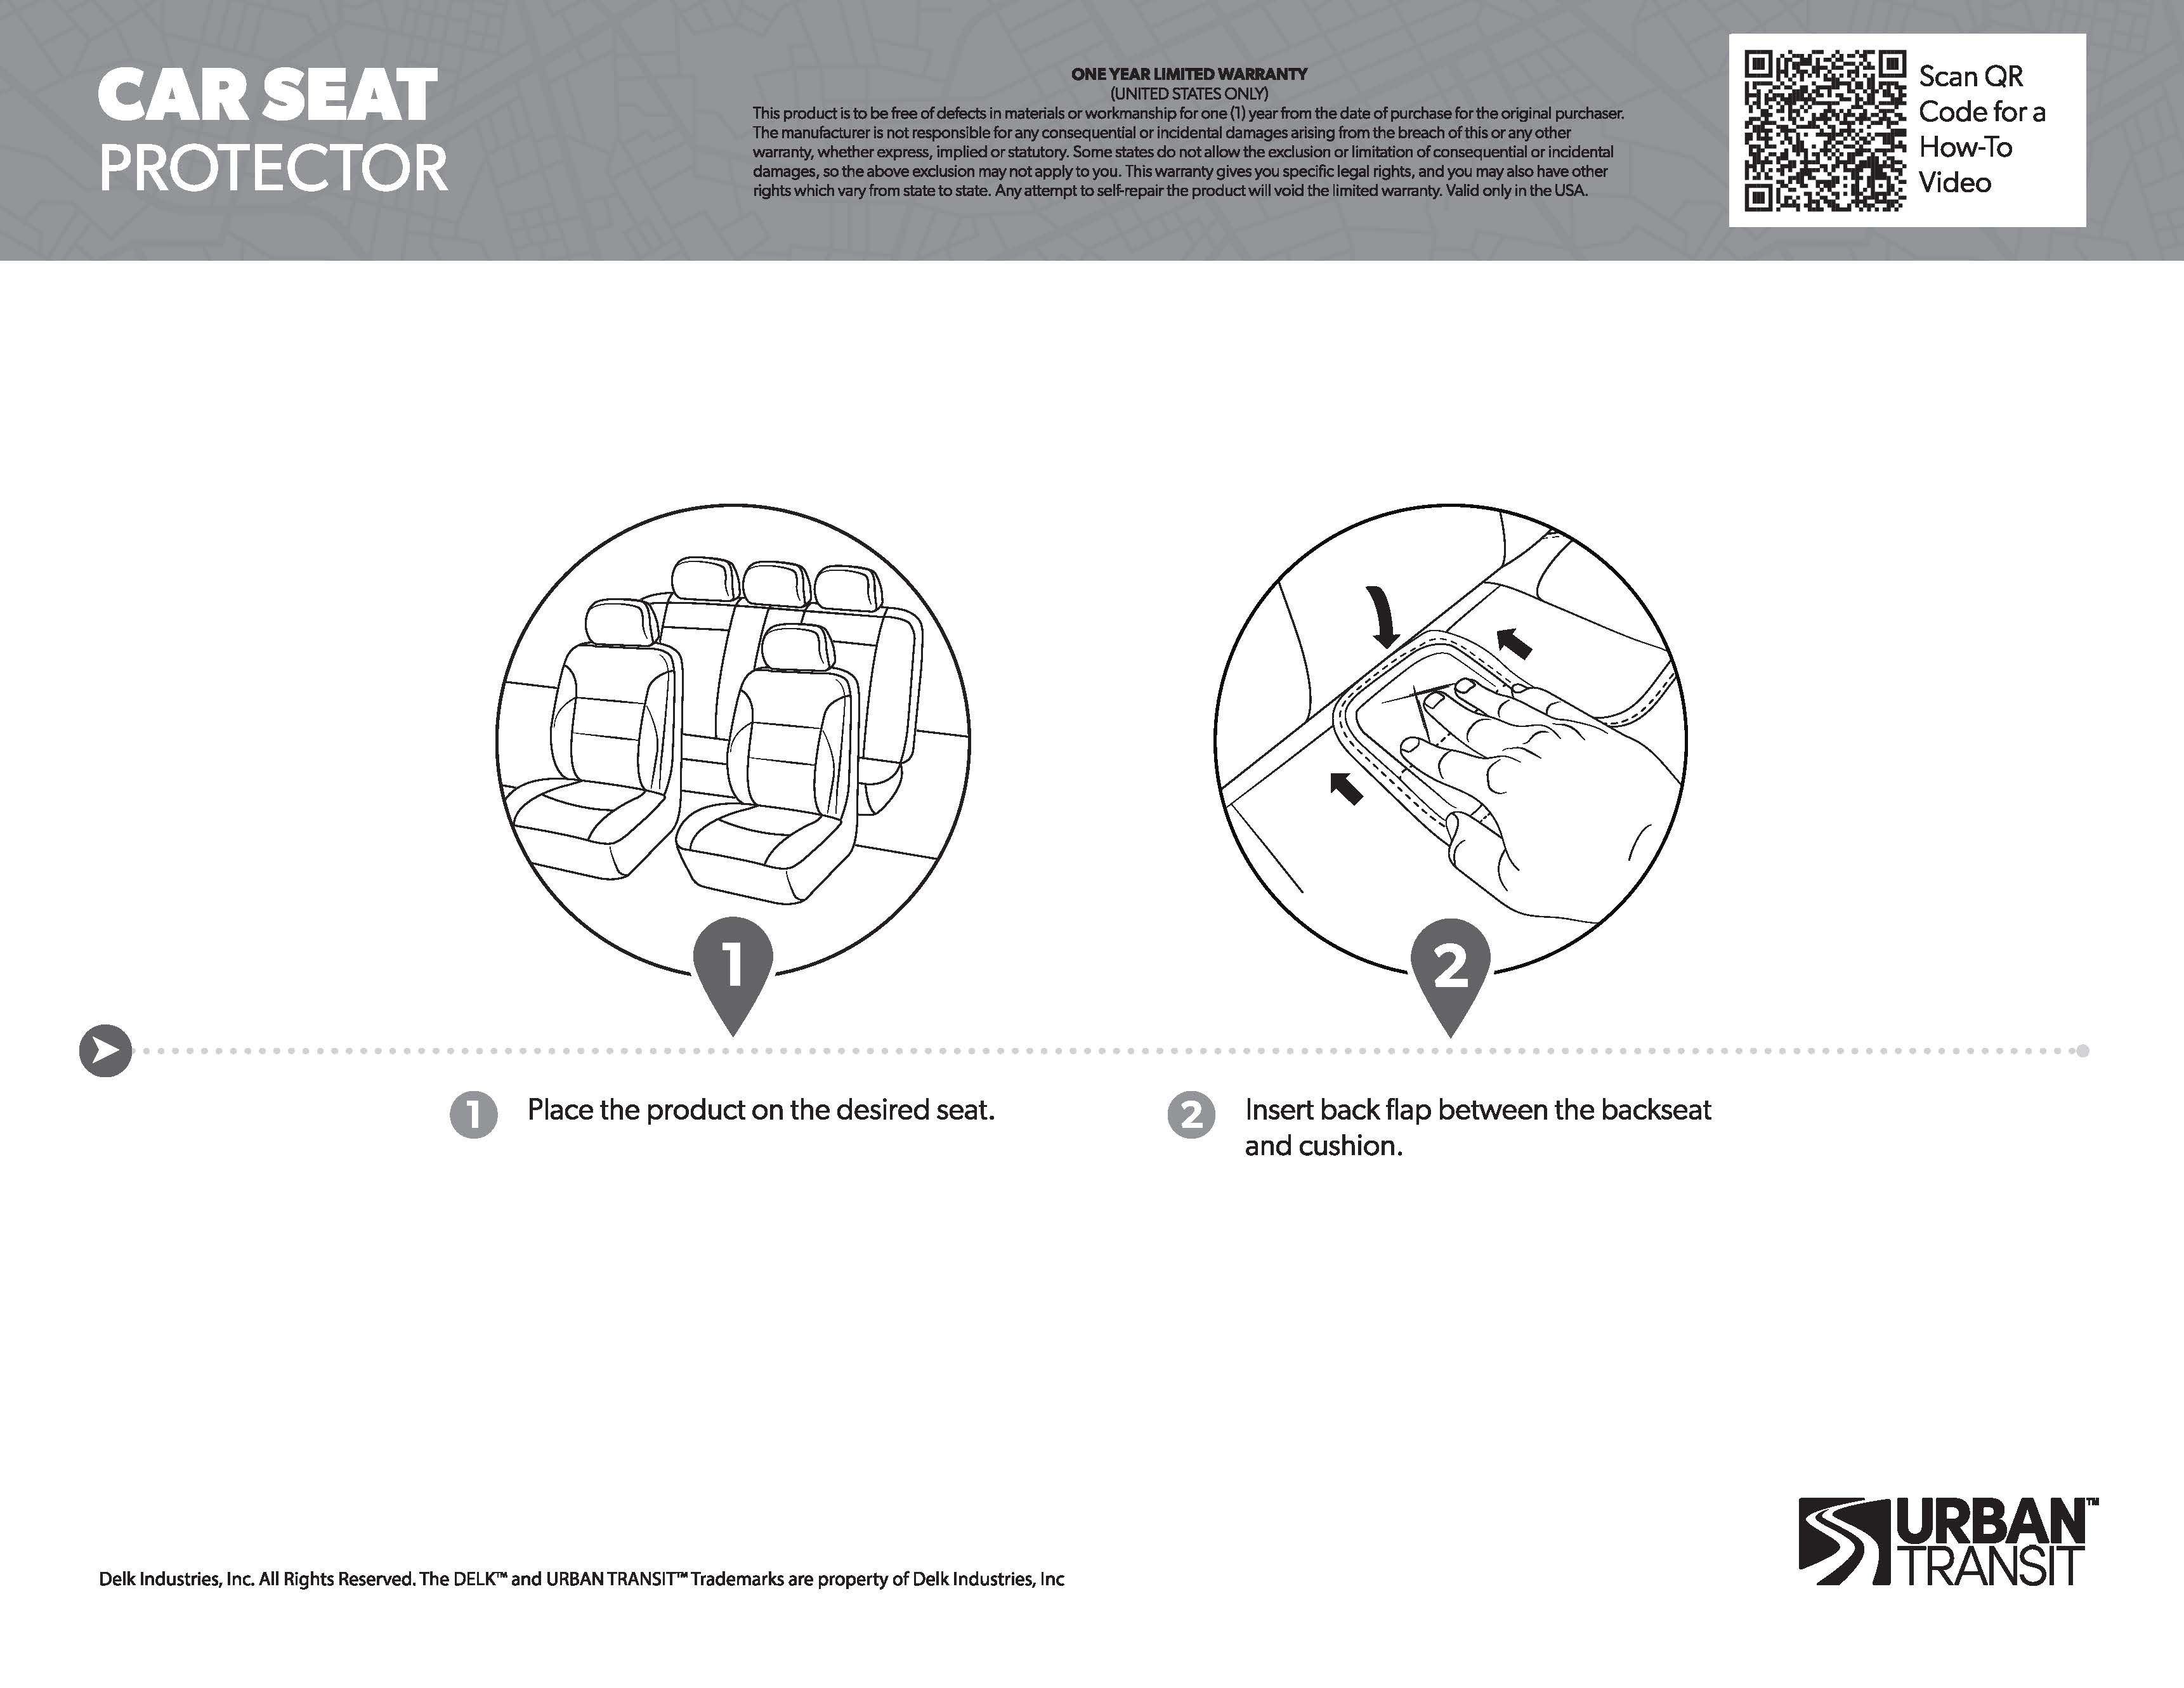 53292-Car_Seat_Protector_IM-OUT.jpg